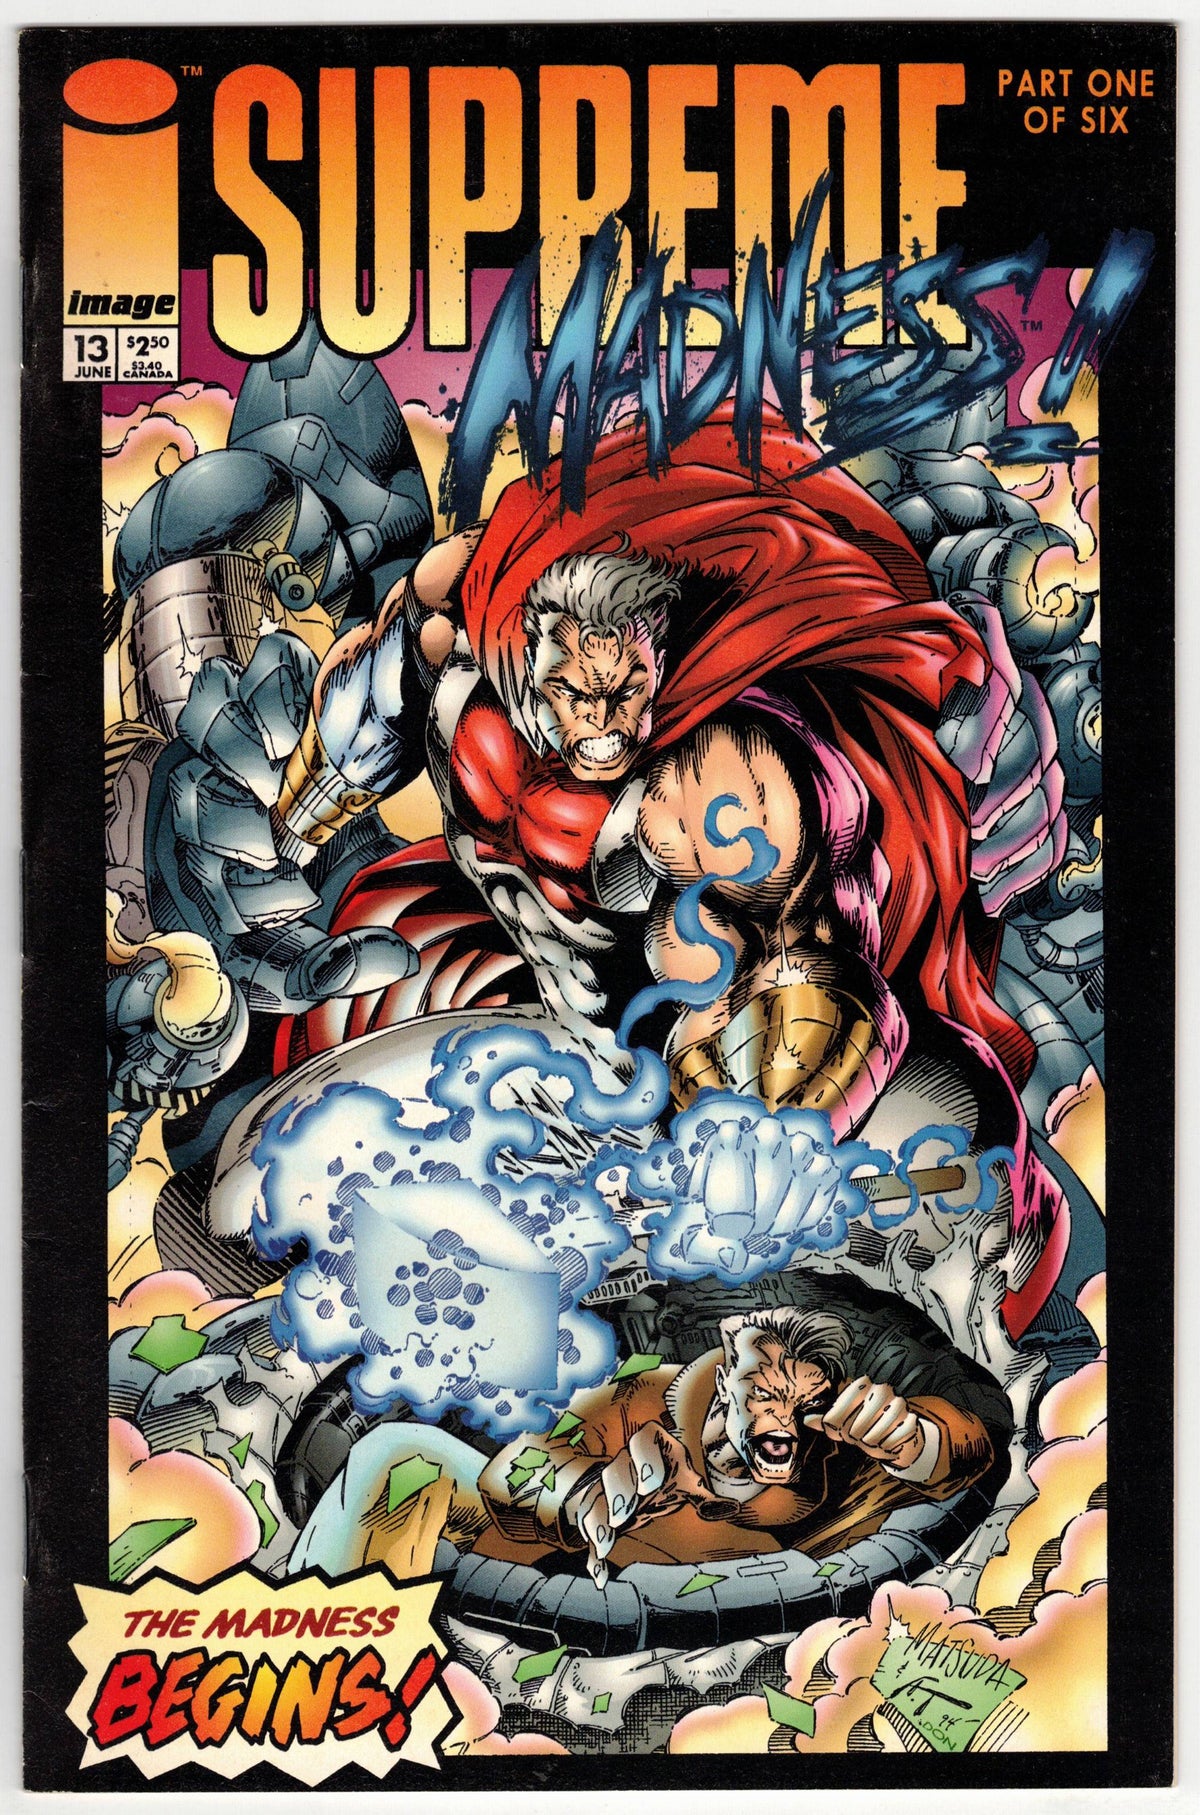 Photo of Supreme (1994) Issue 13 - Comic sold by Stronghold Collectibles